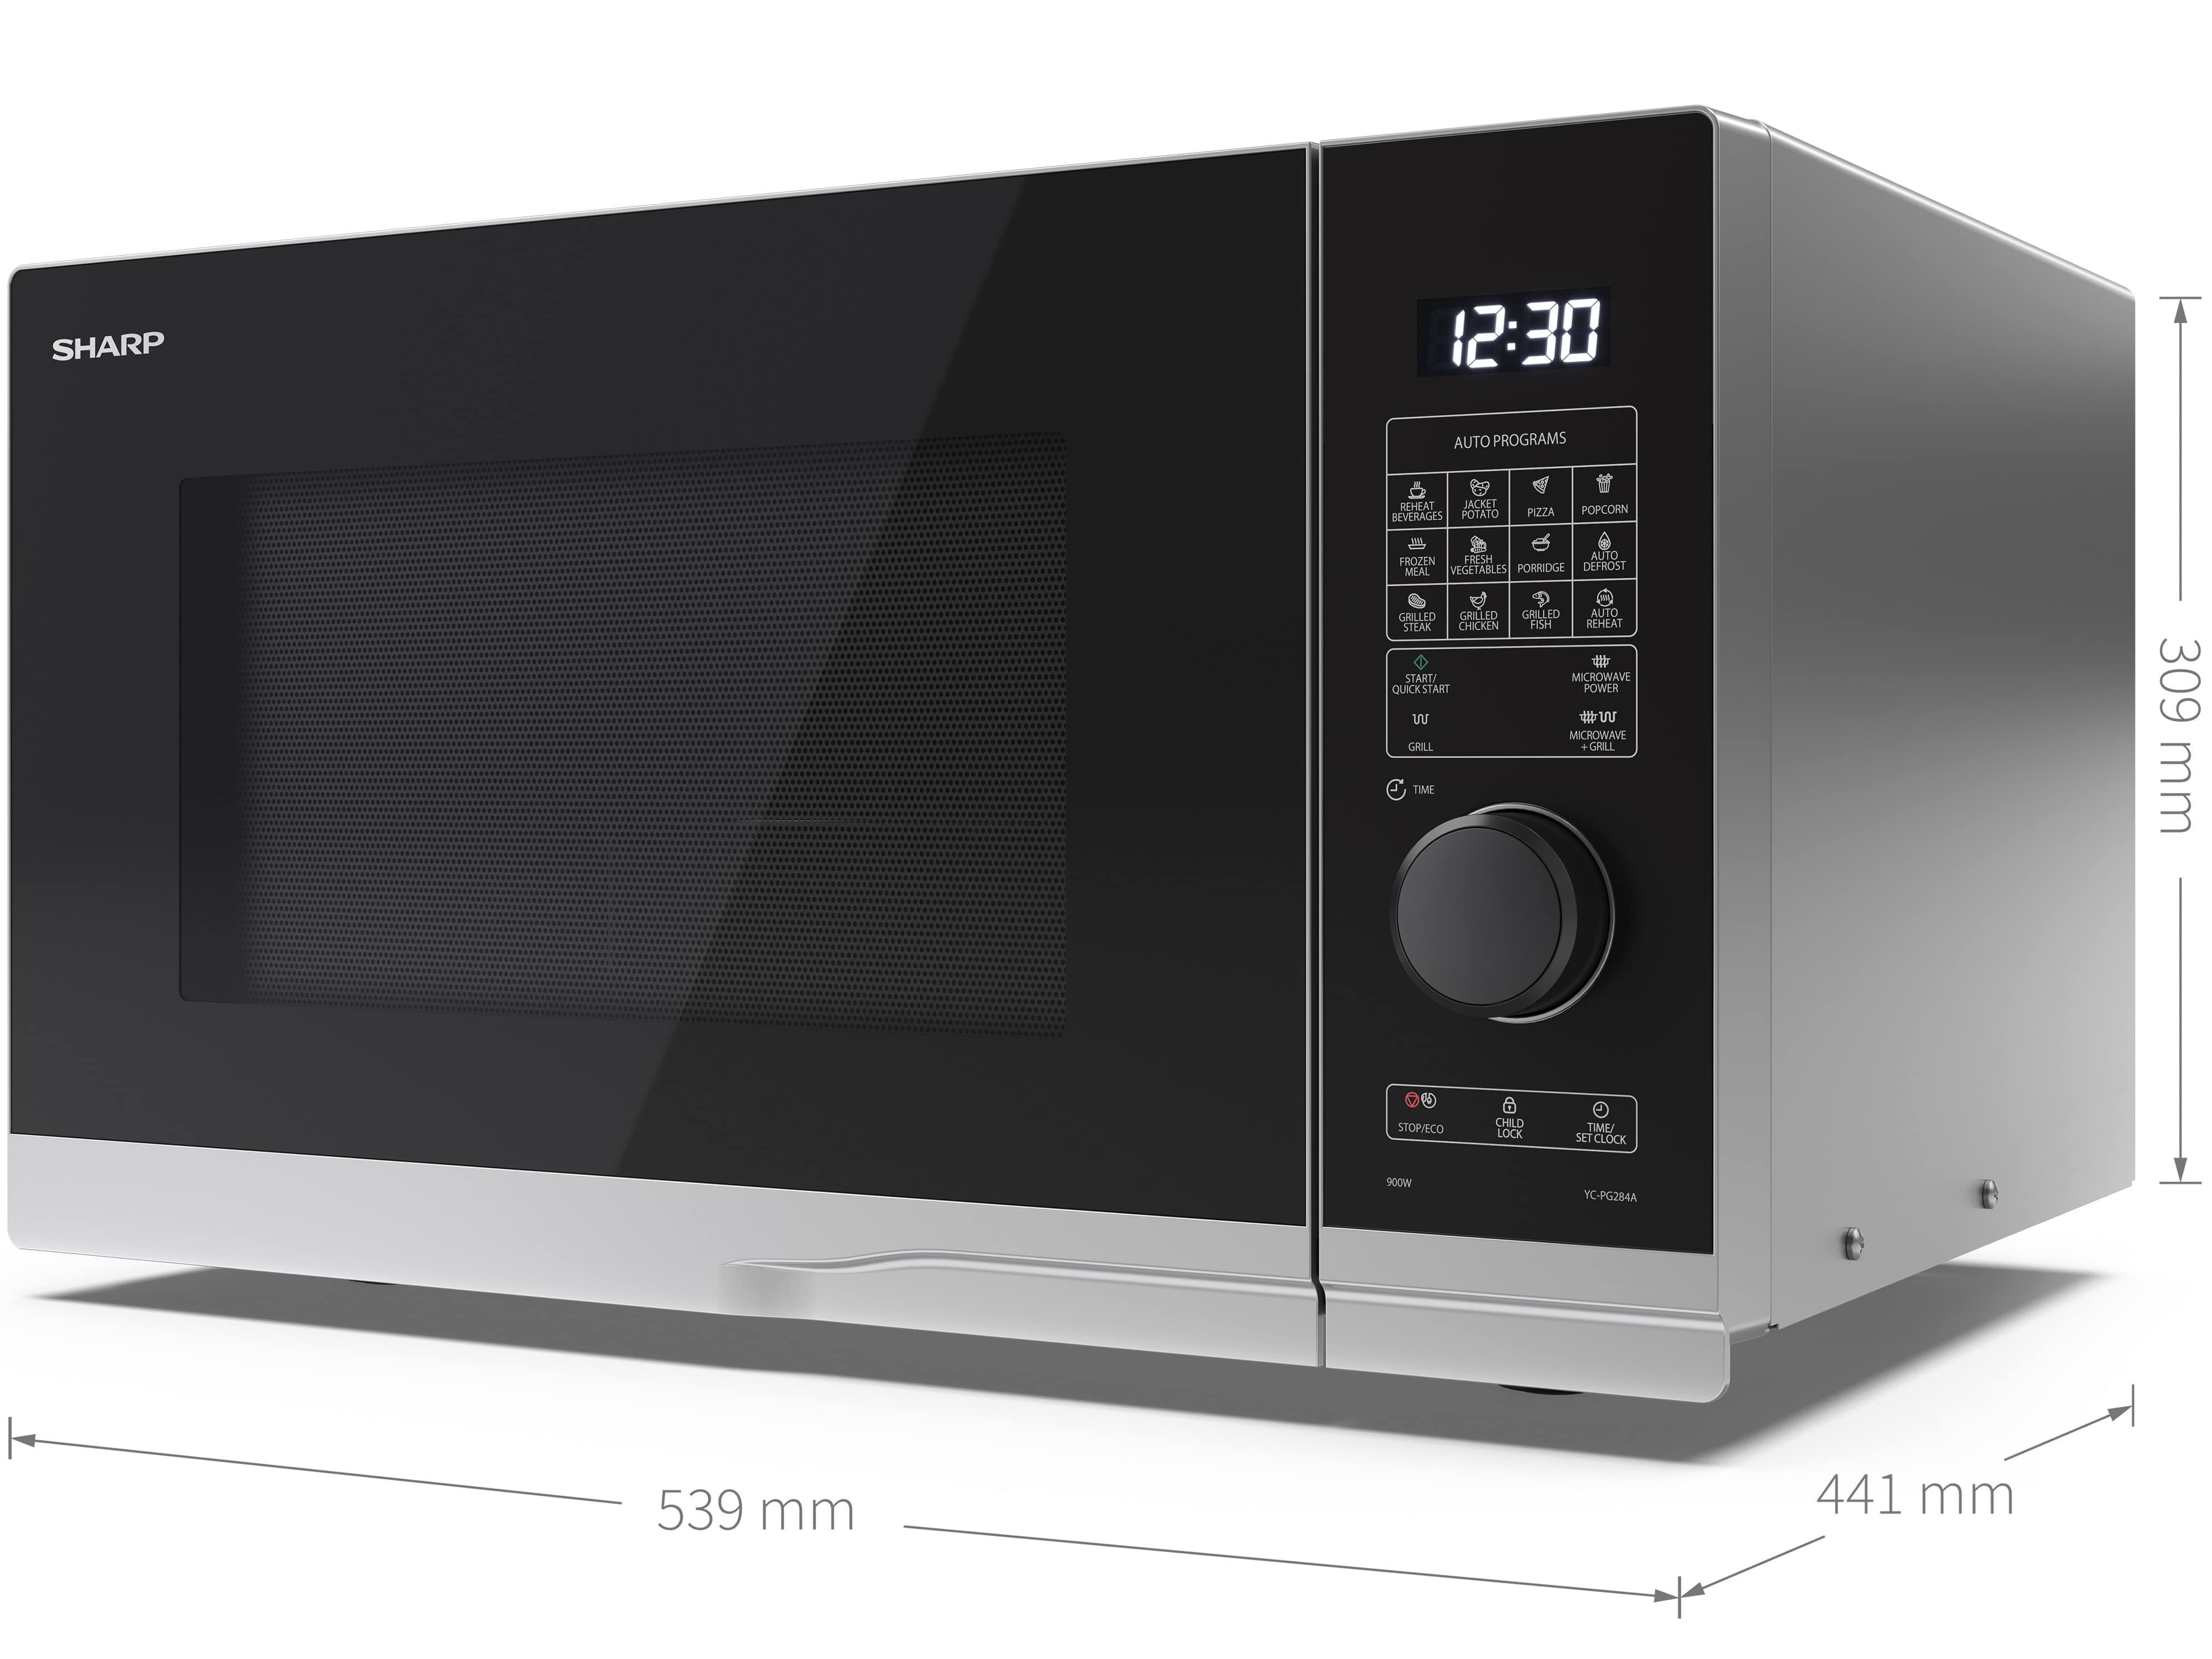 SHARP Mikrowelle YC-PG284AE-S, silber, mit Grill, 28 L, 10-Stufen, 900 W